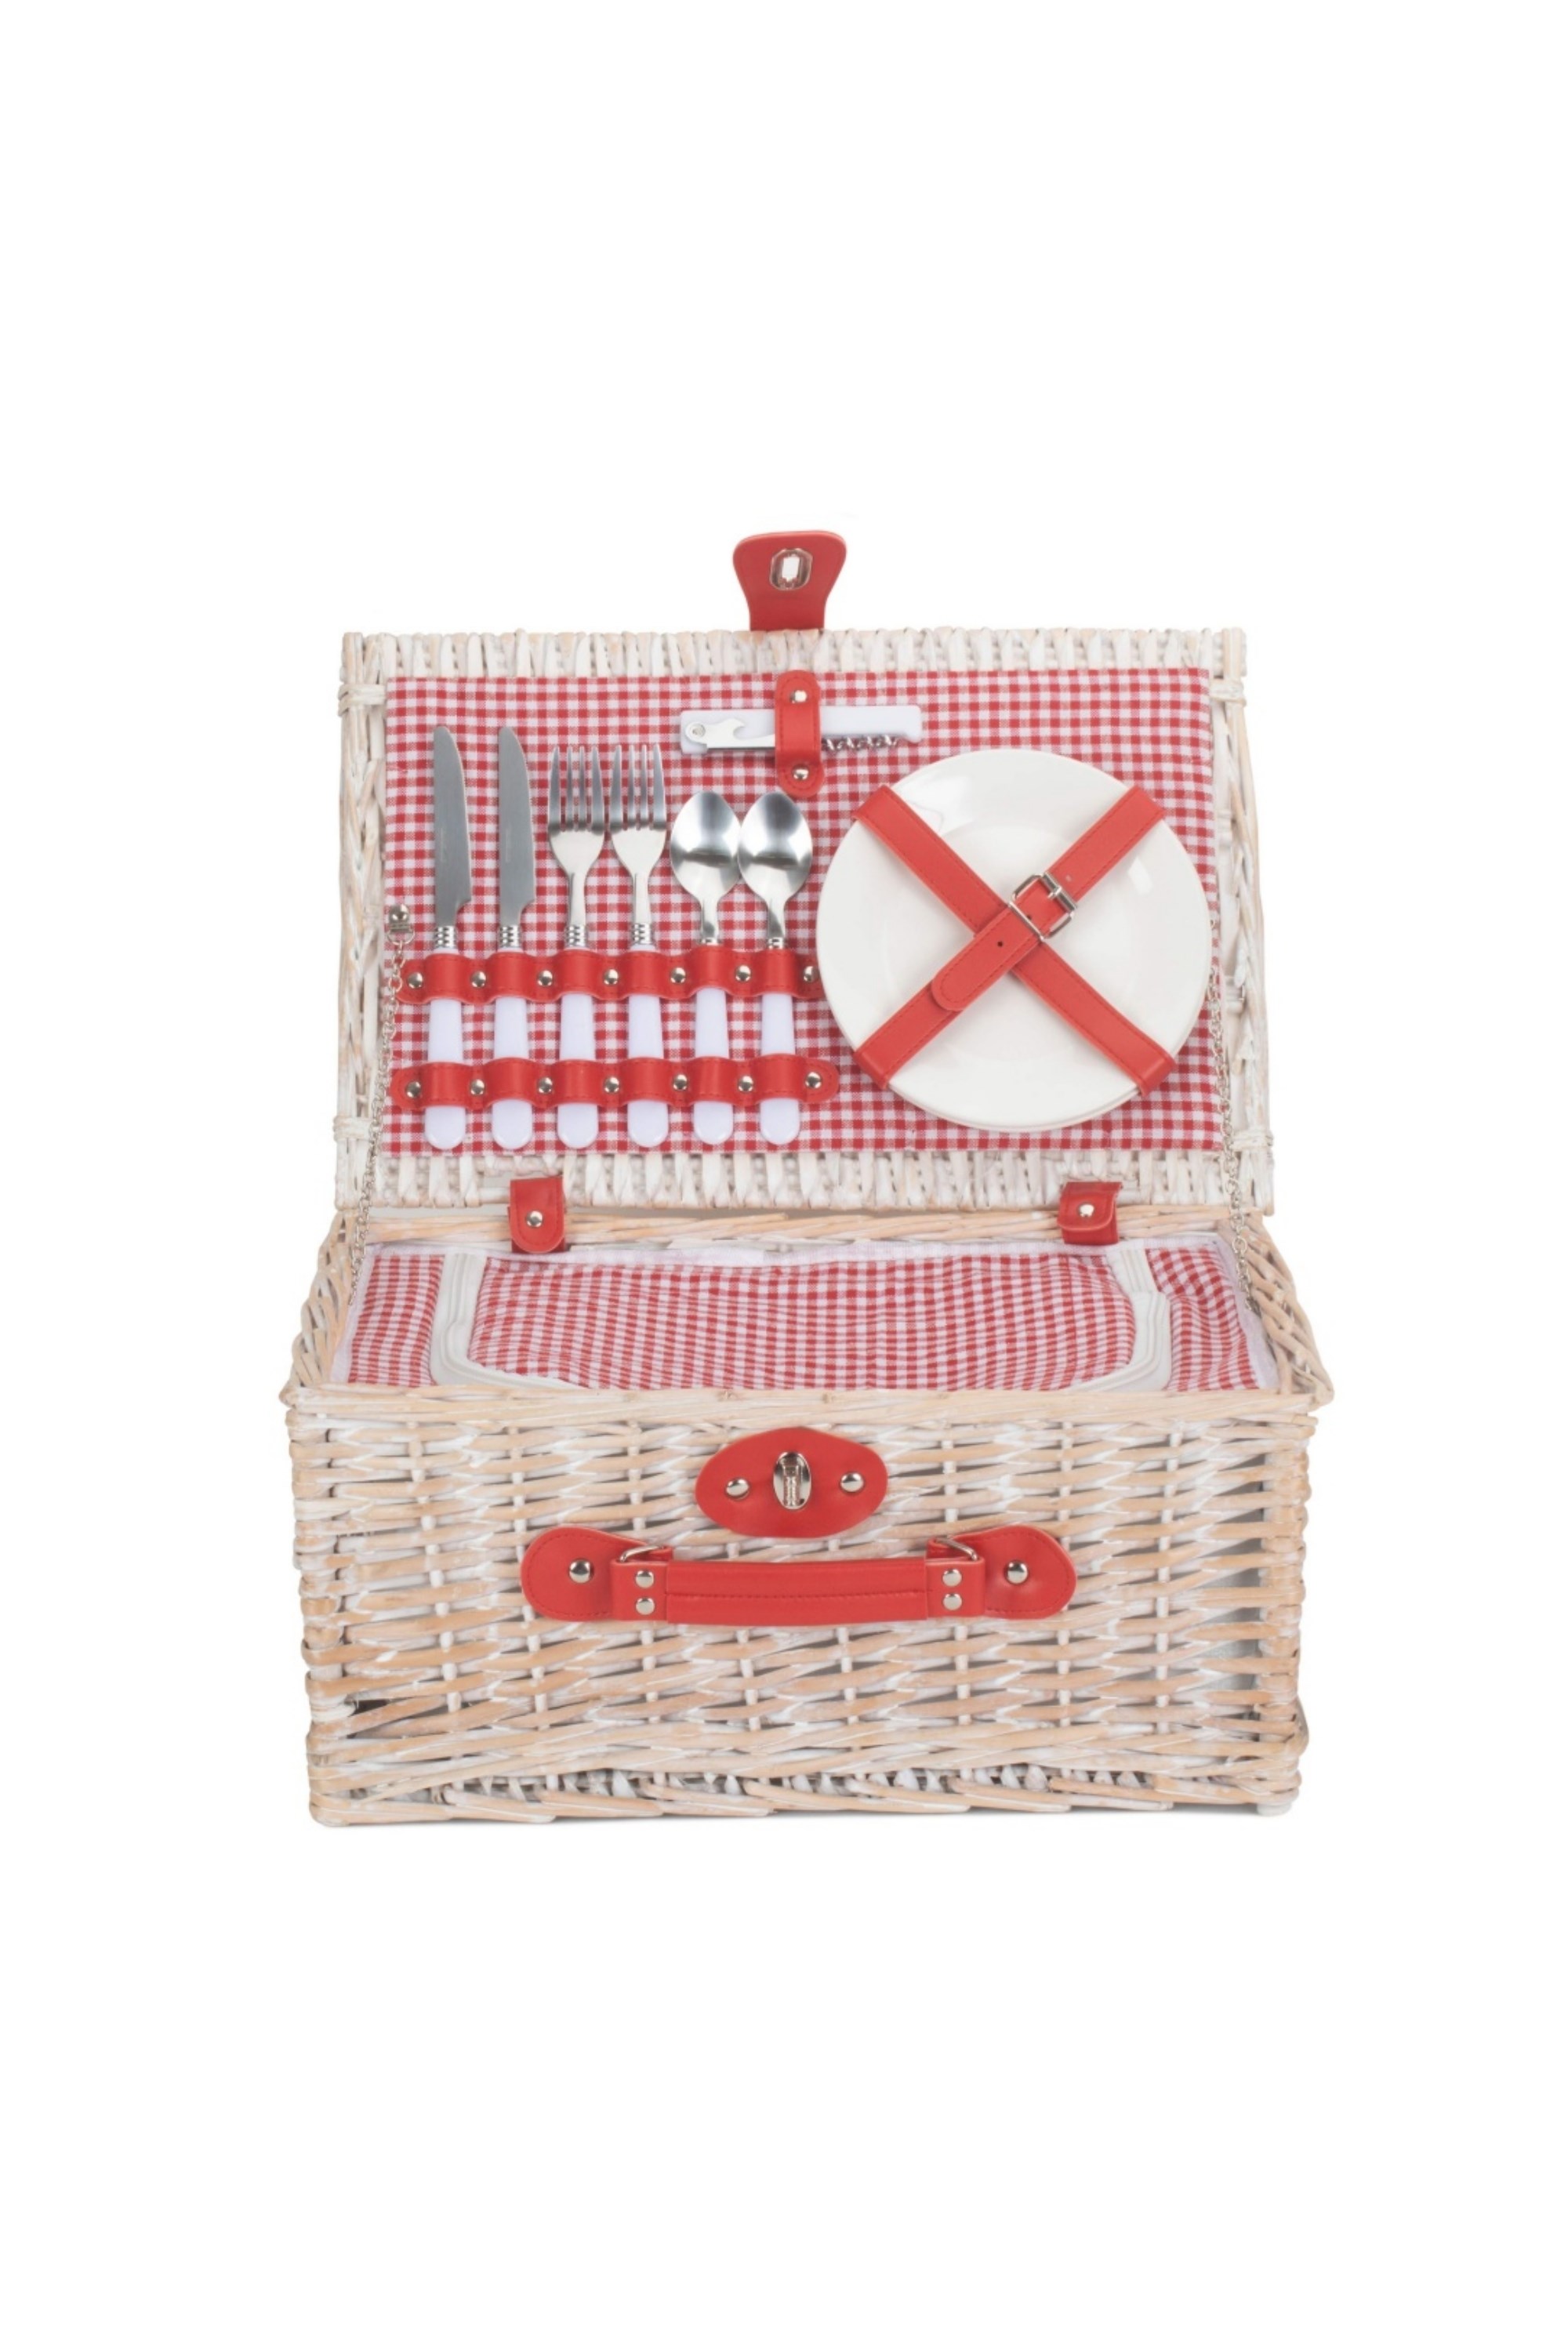 Red And White Gingham 2 Person Picnic Basket -